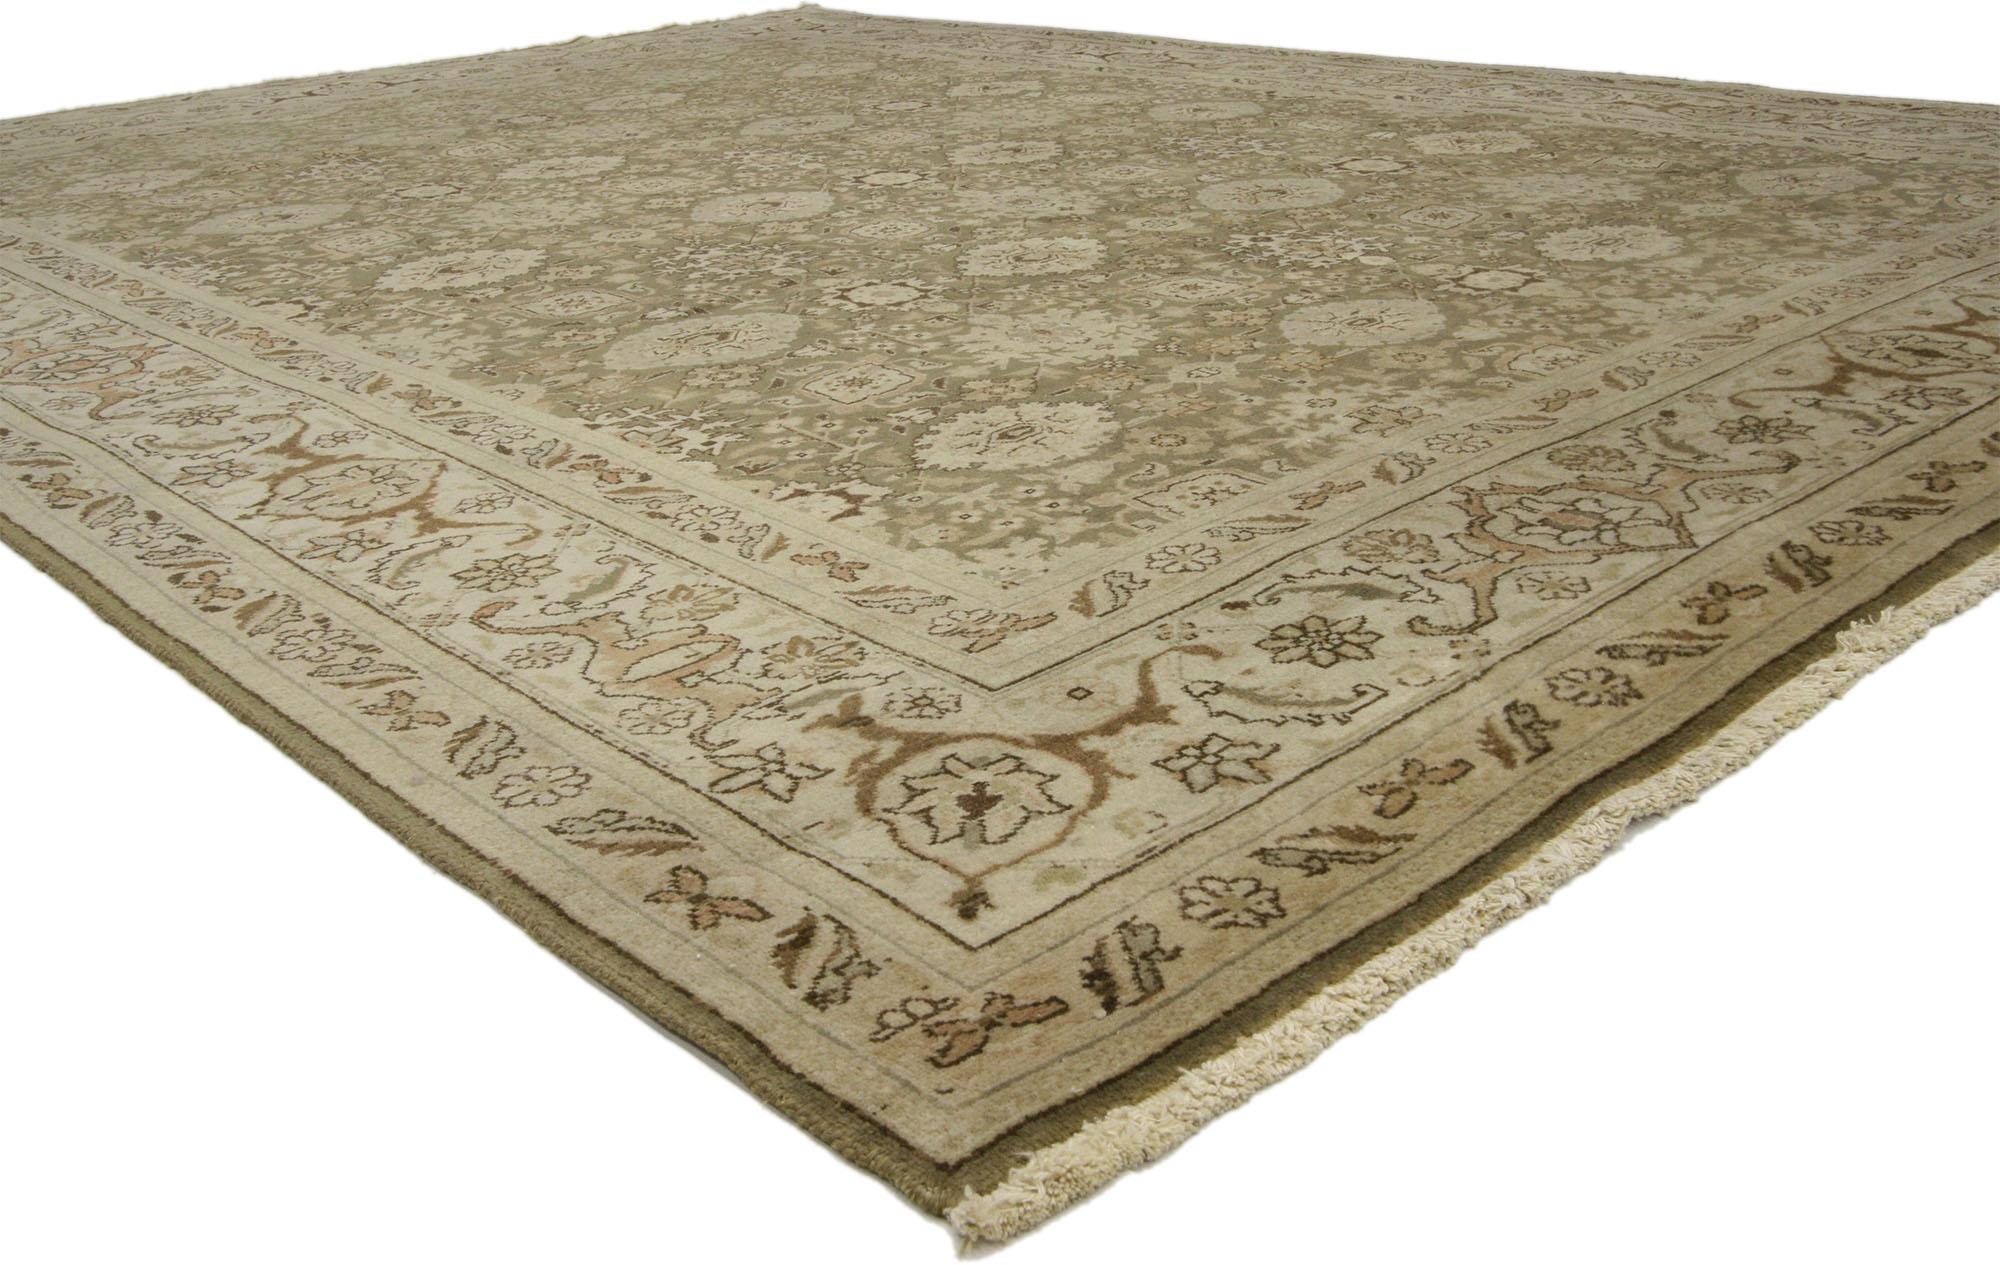 From casual elegance to fresh and formal, relish the refinement as this antique Persian Tabriz rug with traditional style in earth tone colors evoke an air of warmth and comfort with its timeless aesthetic. Rendered in an earth-tone color palette of